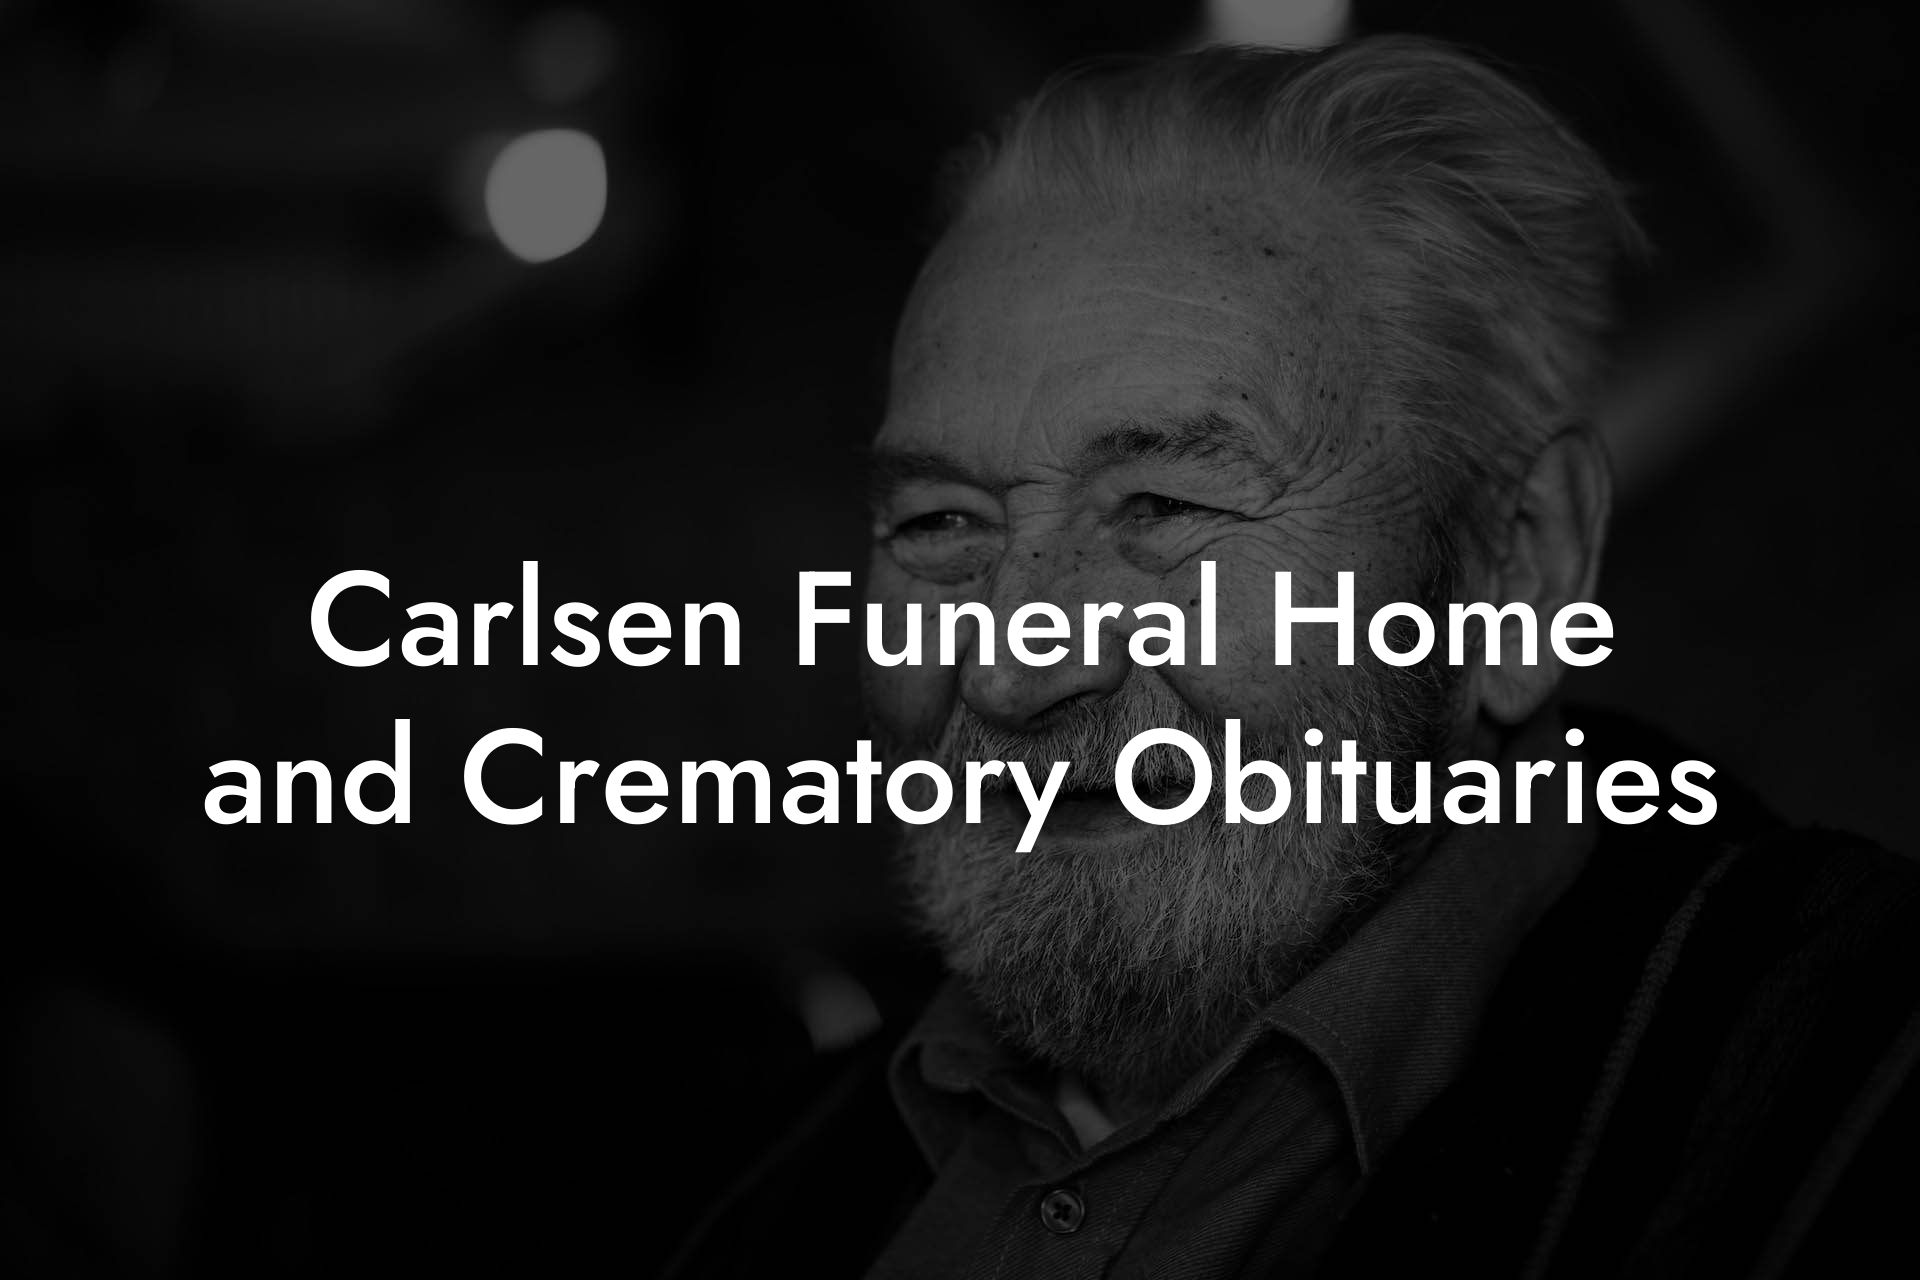 Carlsen Funeral Home and Crematory Obituaries